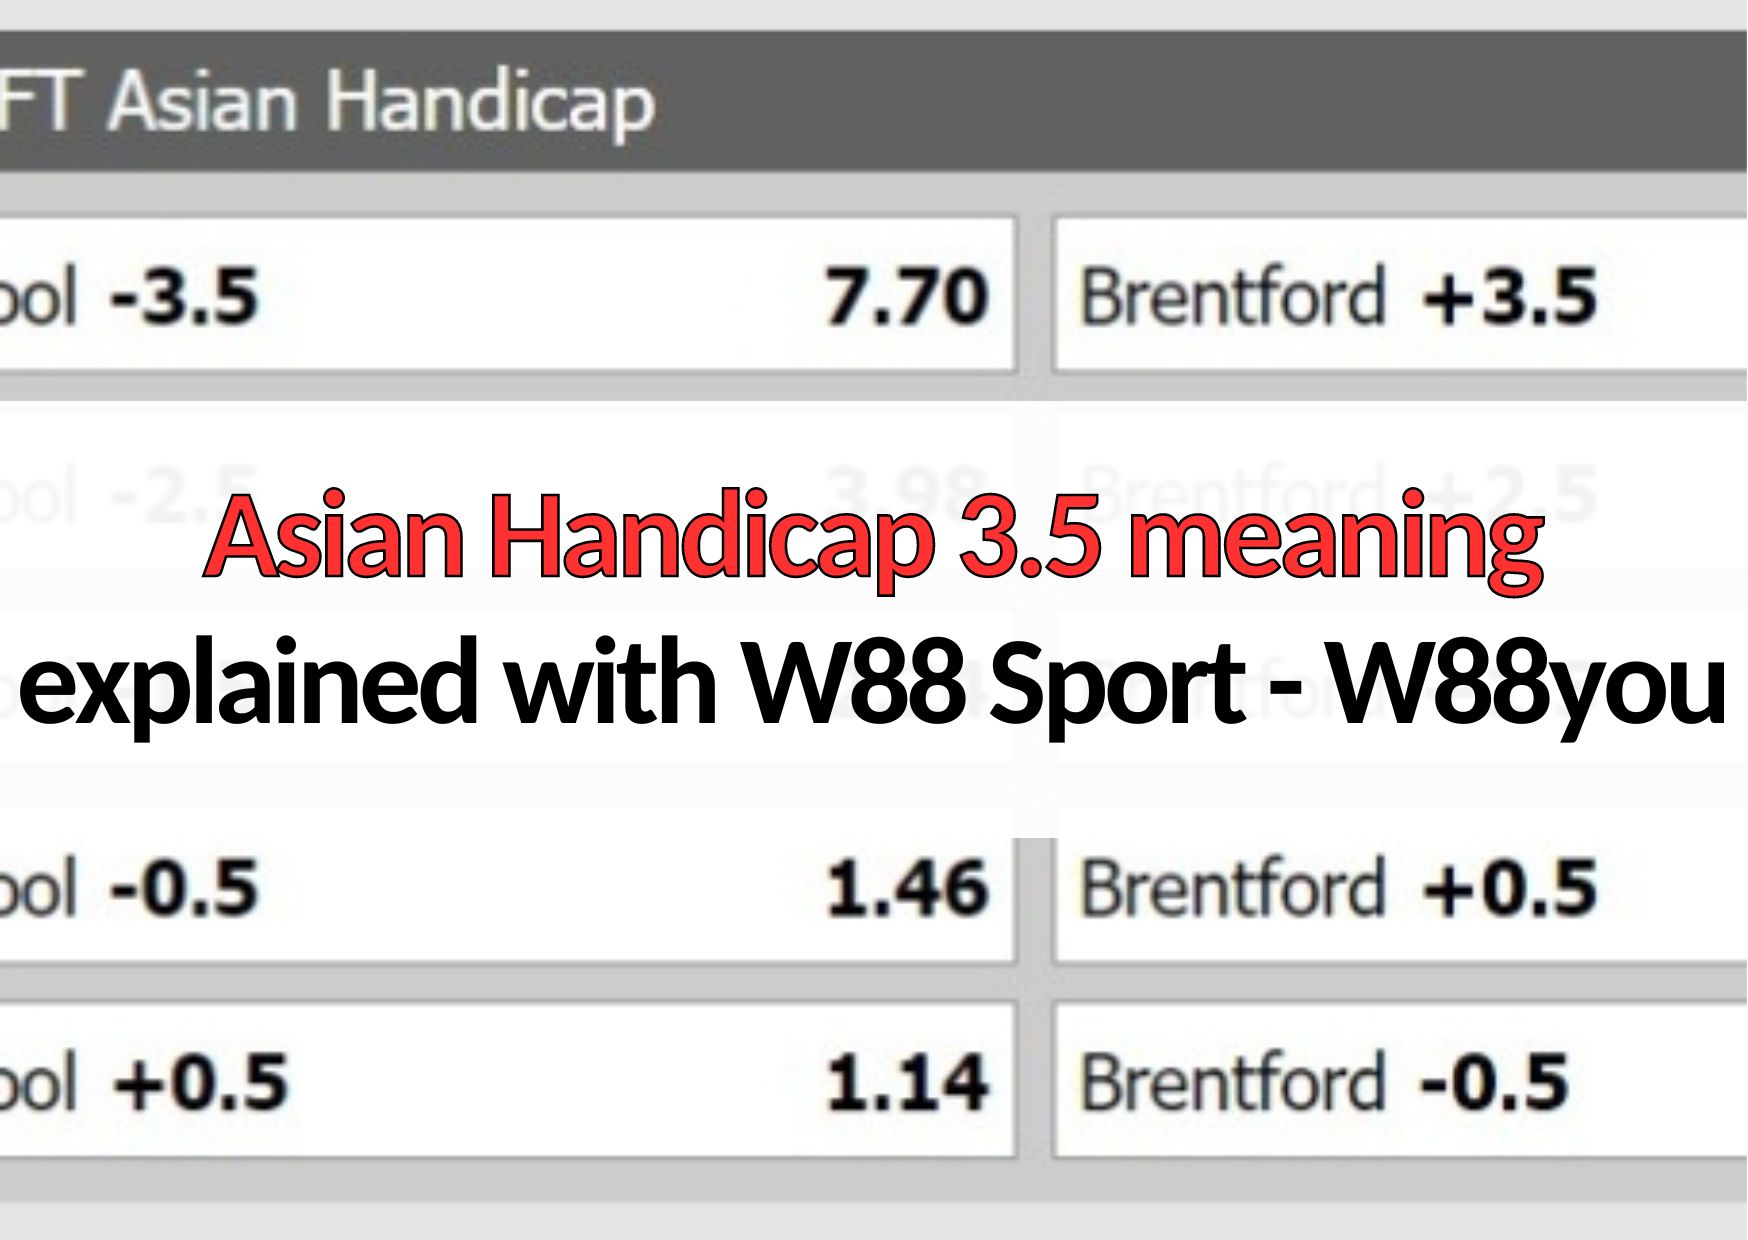 Asian Handicap 3.5 meaning